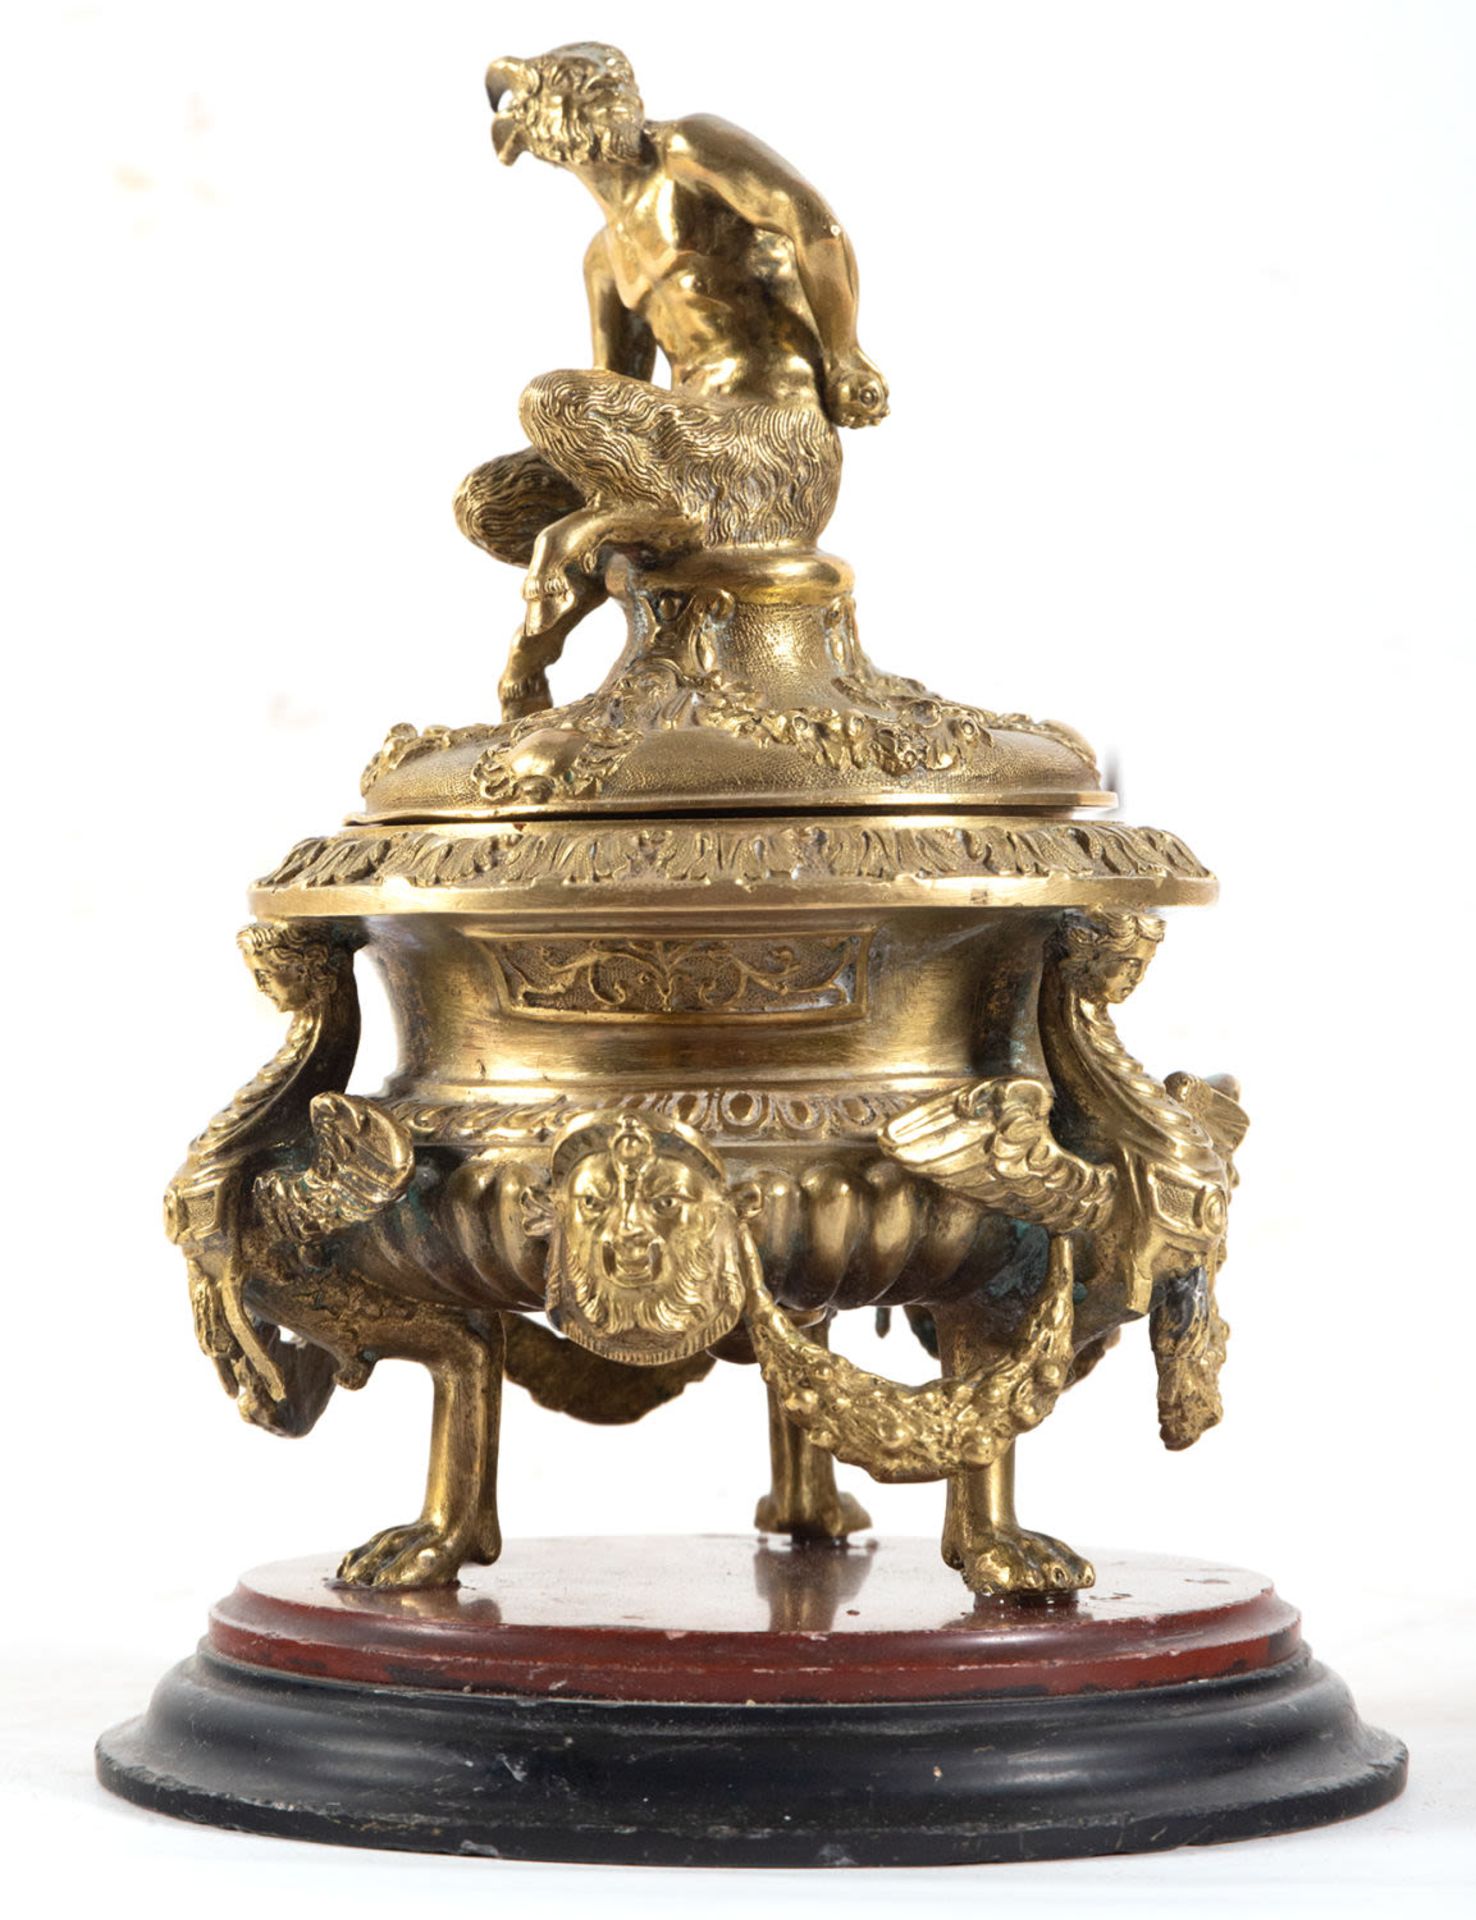 Elegant French Empire mercury-gilt bronze censer, French work from the 19th century - Image 3 of 4